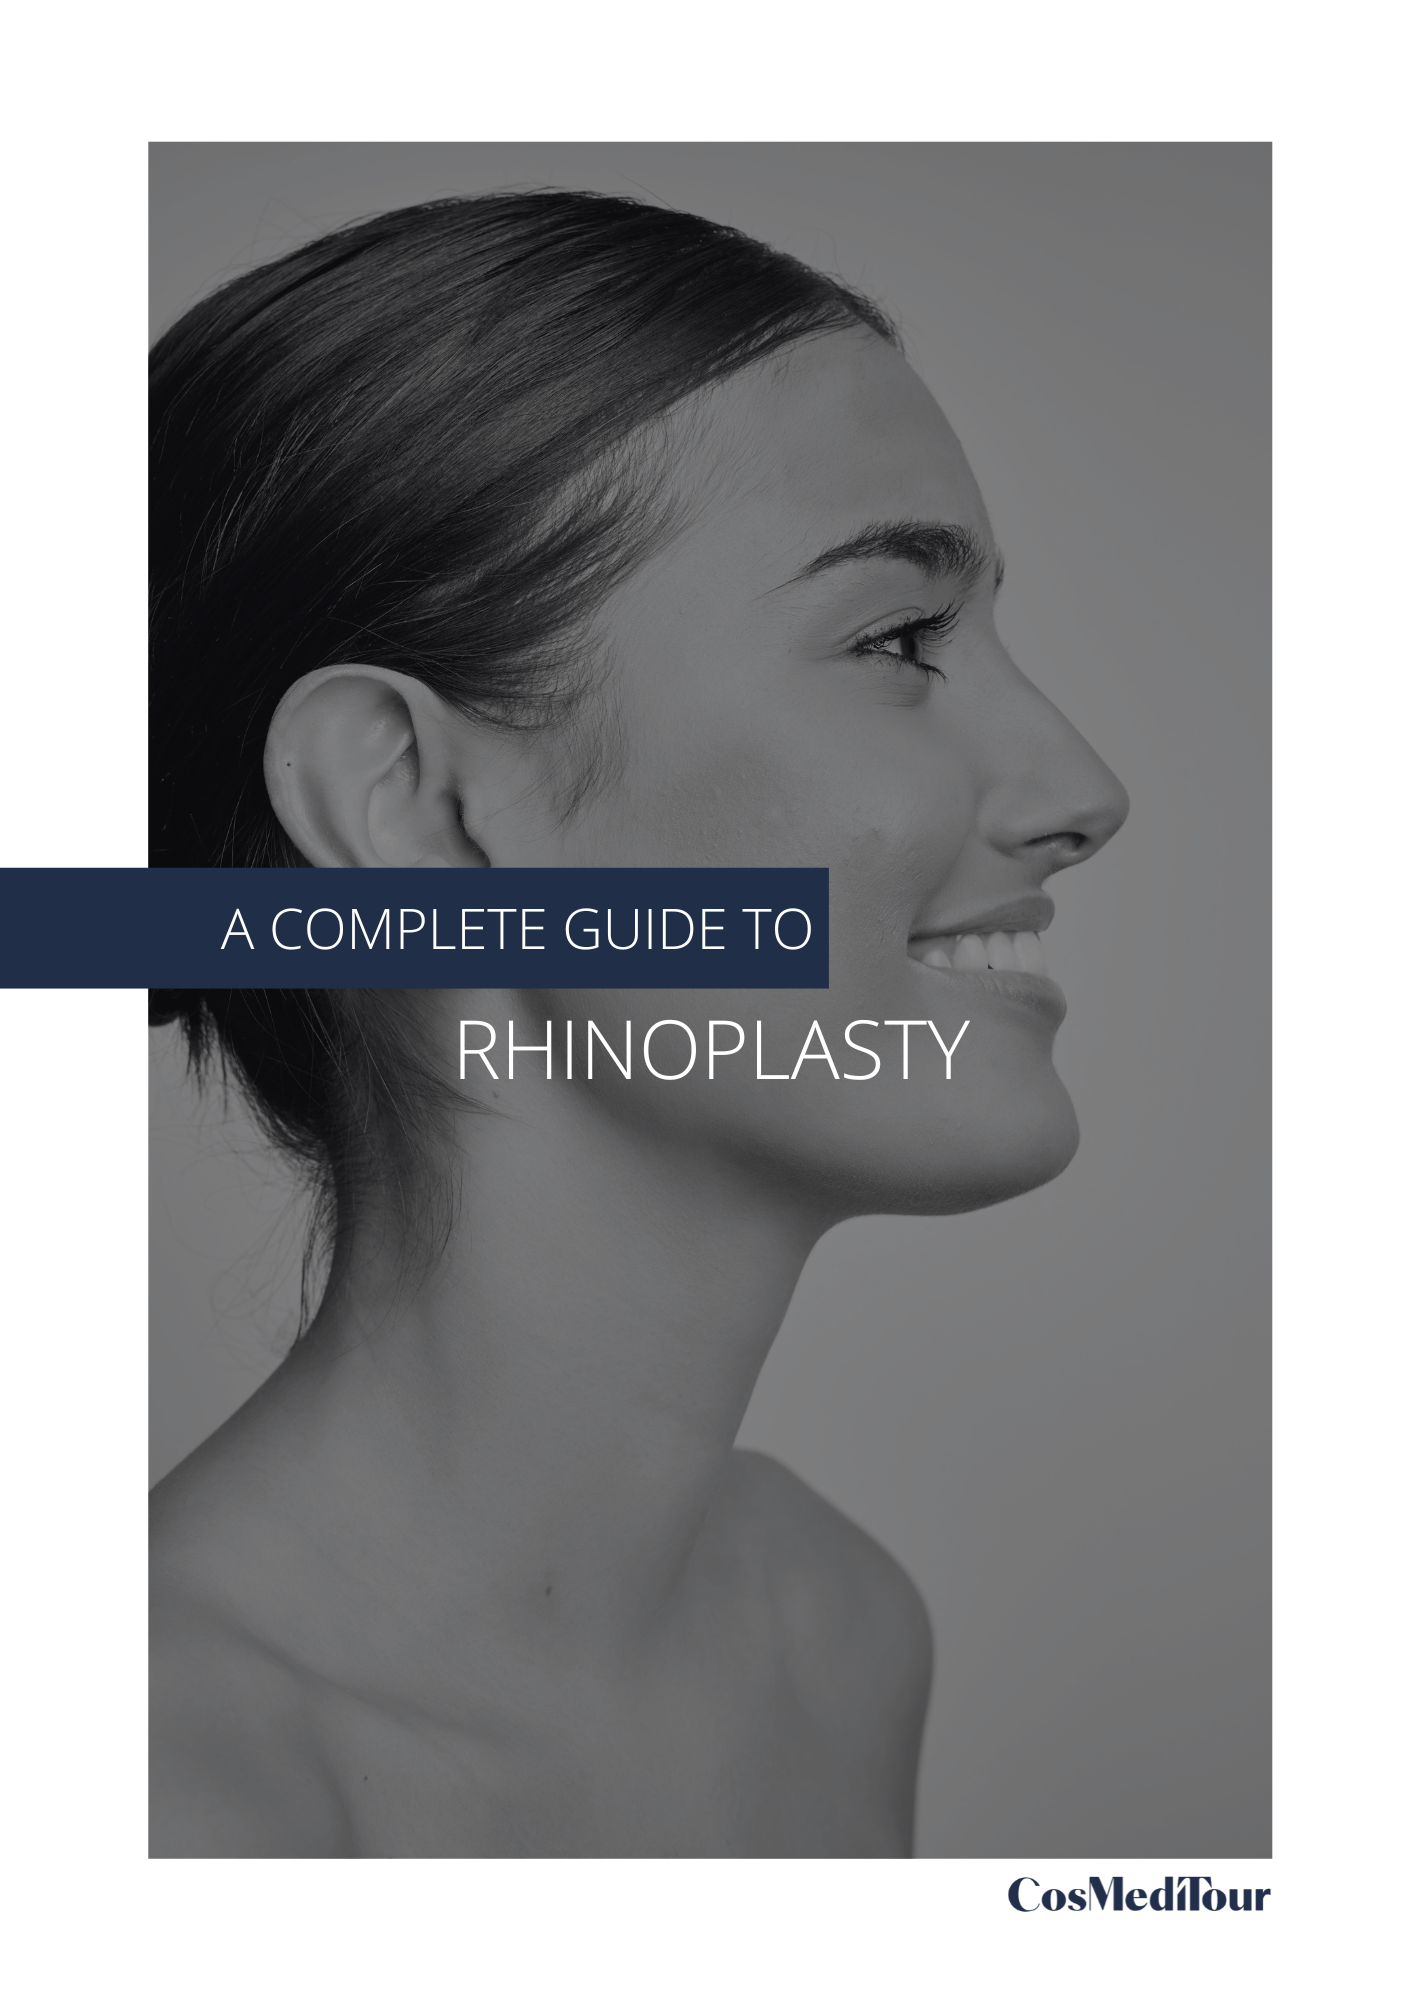 Your Guide to Rhinoplasty